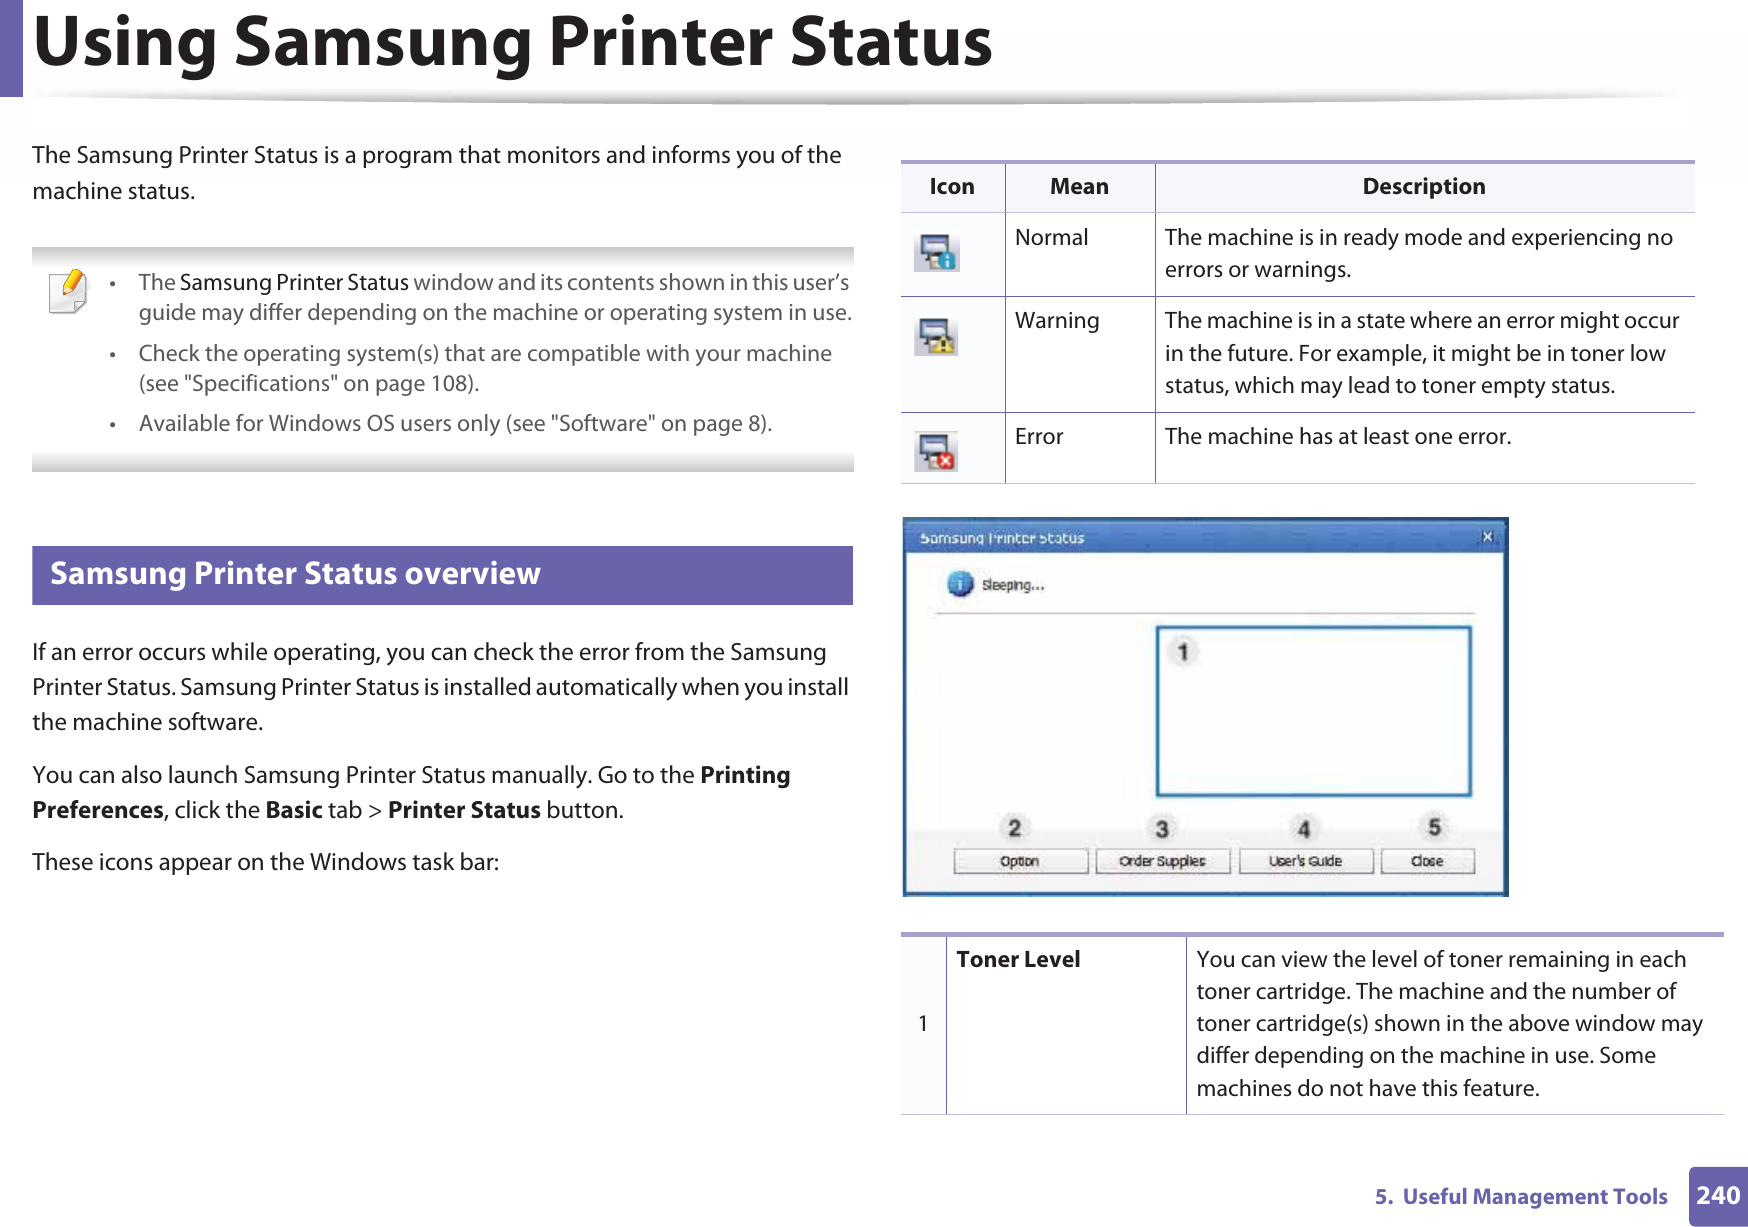 2405.  Useful Management ToolsUsing Samsung Printer Status The Samsung Printer Status is a program that monitors and informs you of the machine status.  • The Samsung Printer Status window and its contents shown in this user’s guide may differ depending on the machine or operating system in use.• Check the operating system(s) that are compatible with your machine (see &quot;Specifications&quot; on page 108).• Available for Windows OS users only (see &quot;Software&quot; on page 8). 7 Samsung Printer Status overviewIf an error occurs while operating, you can check the error from the Samsung Printer Status. Samsung Printer Status is installed automatically when you install the machine software. You can also launch Samsung Printer Status manually. Go to the Printing Preferences, click the Basic tab &gt; Printer Status button.These icons appear on the Windows task bar:Icon Mean DescriptionNormal The machine is in ready mode and experiencing no errors or warnings.Warning The machine is in a state where an error might occur in the future. For example, it might be in toner low status, which may lead to toner empty status. Error The machine has at least one error.1Toner Level You can view the level of toner remaining in each toner cartridge. The machine and the number of toner cartridge(s) shown in the above window may differ depending on the machine in use. Some machines do not have this feature.